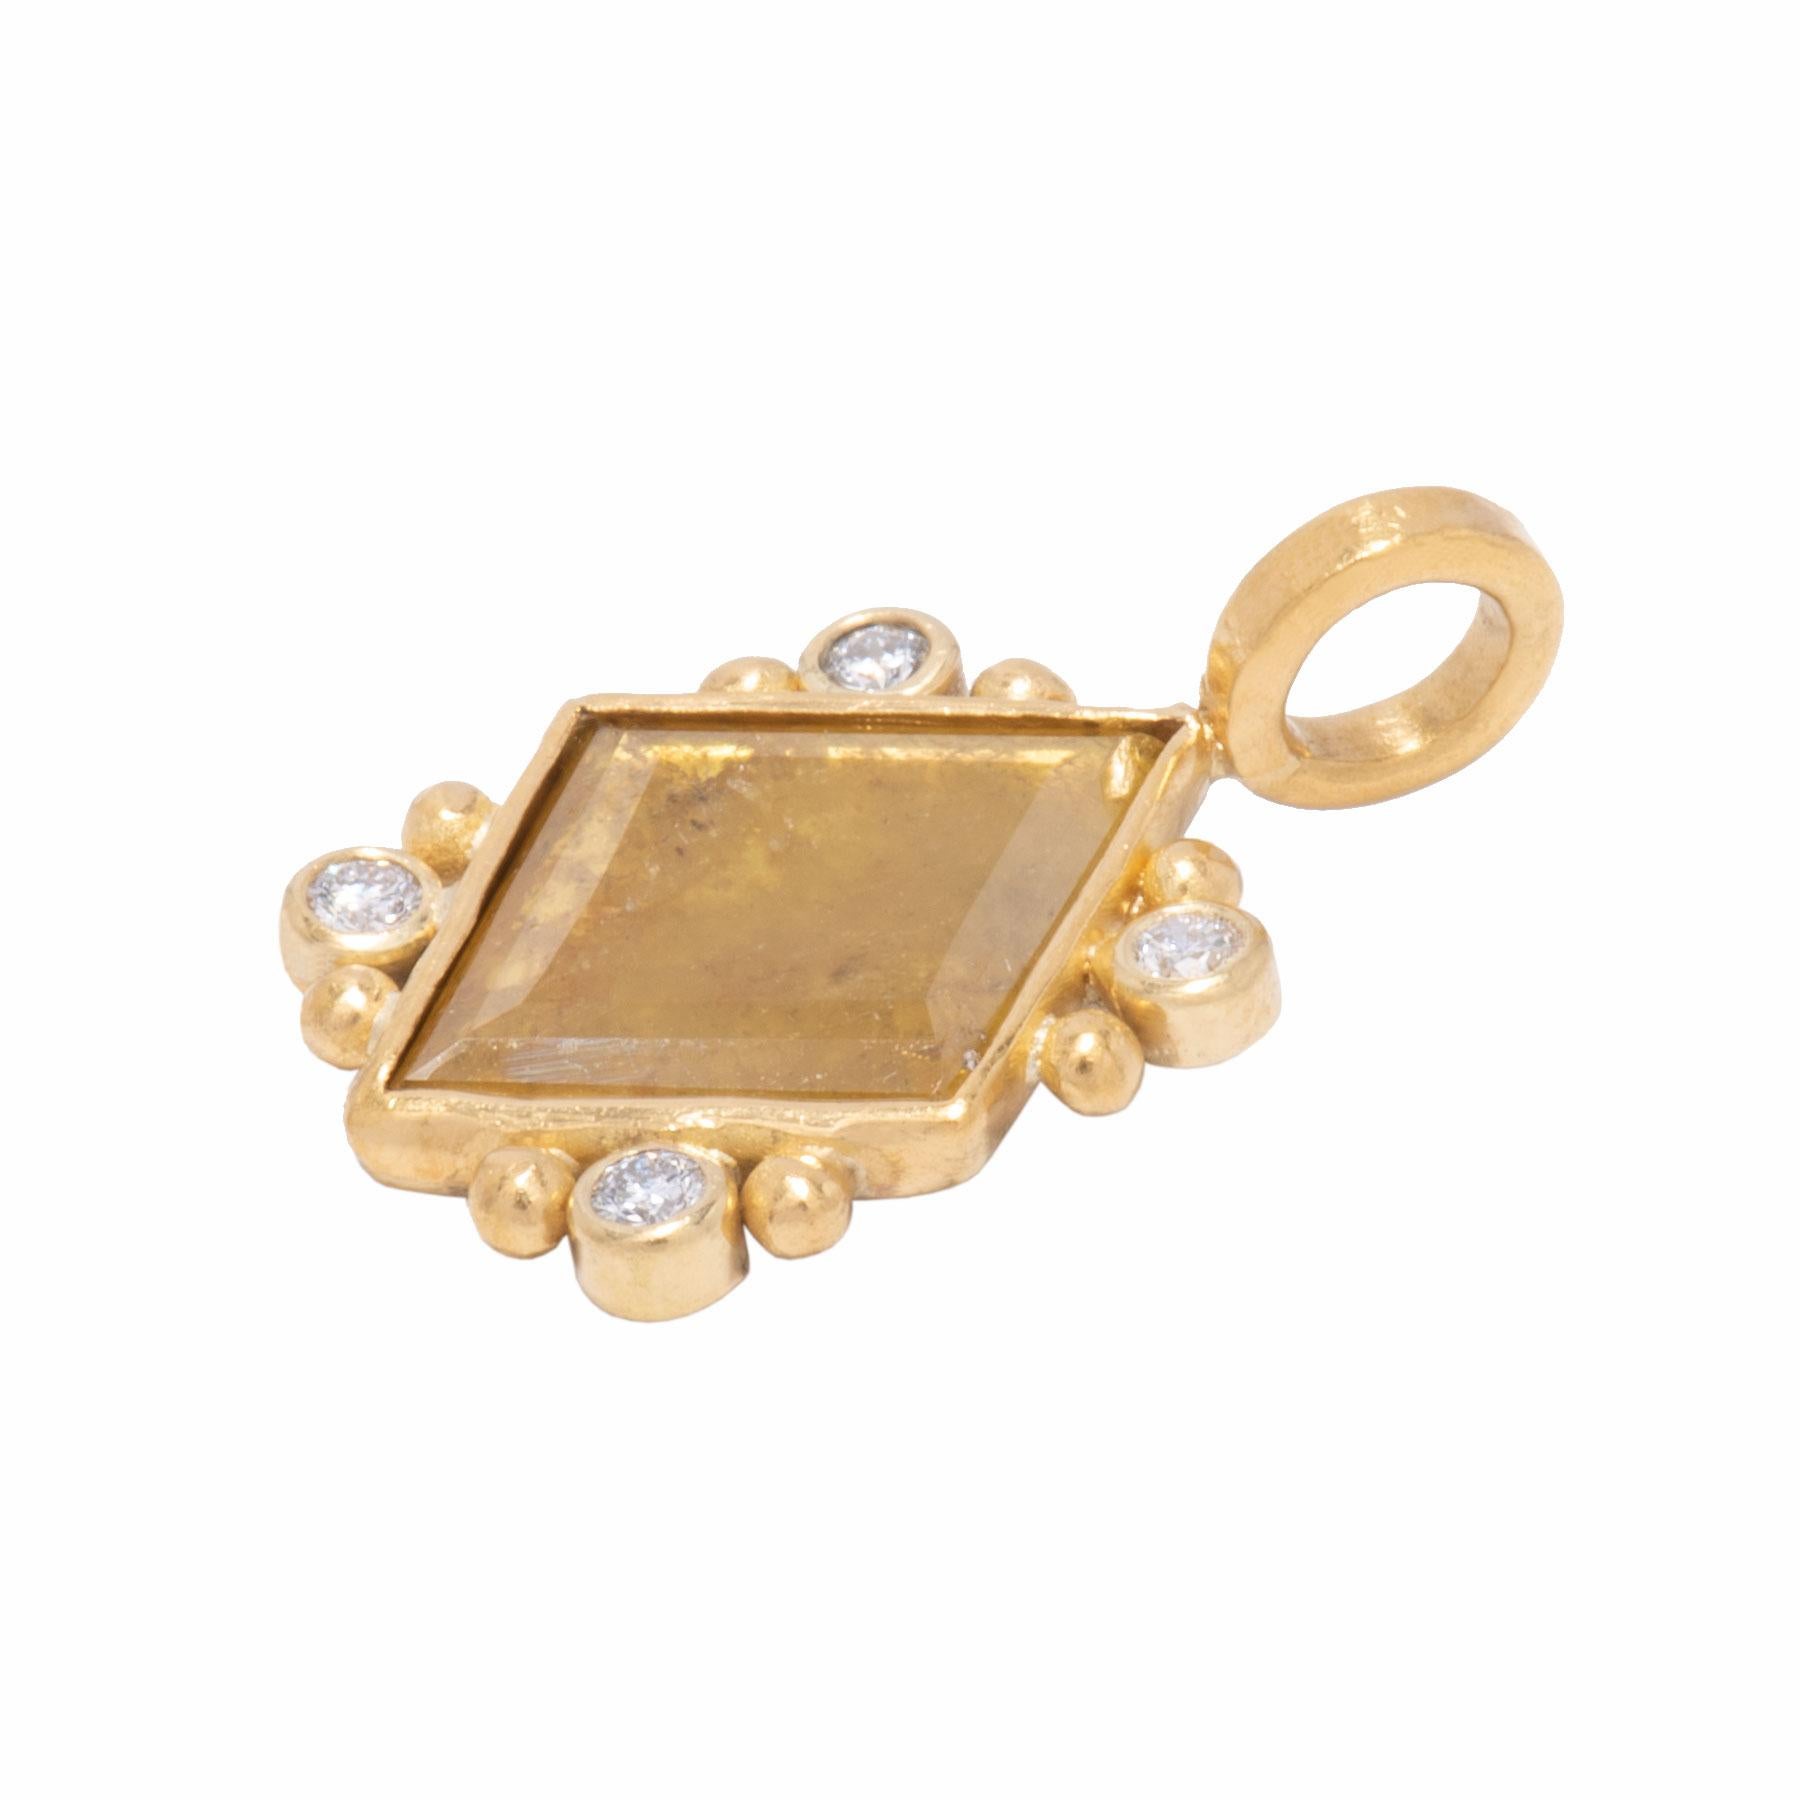 The Queen of Diamonds Pendant holds a 1.84 ct rose cut golden diamond in an 18 karat gold frame with our signature satin finish. Delicate, 22 karat gold beads snuggle .12 ctw diamond melee on 4 sides to enhance the play of light on rose cut facets.